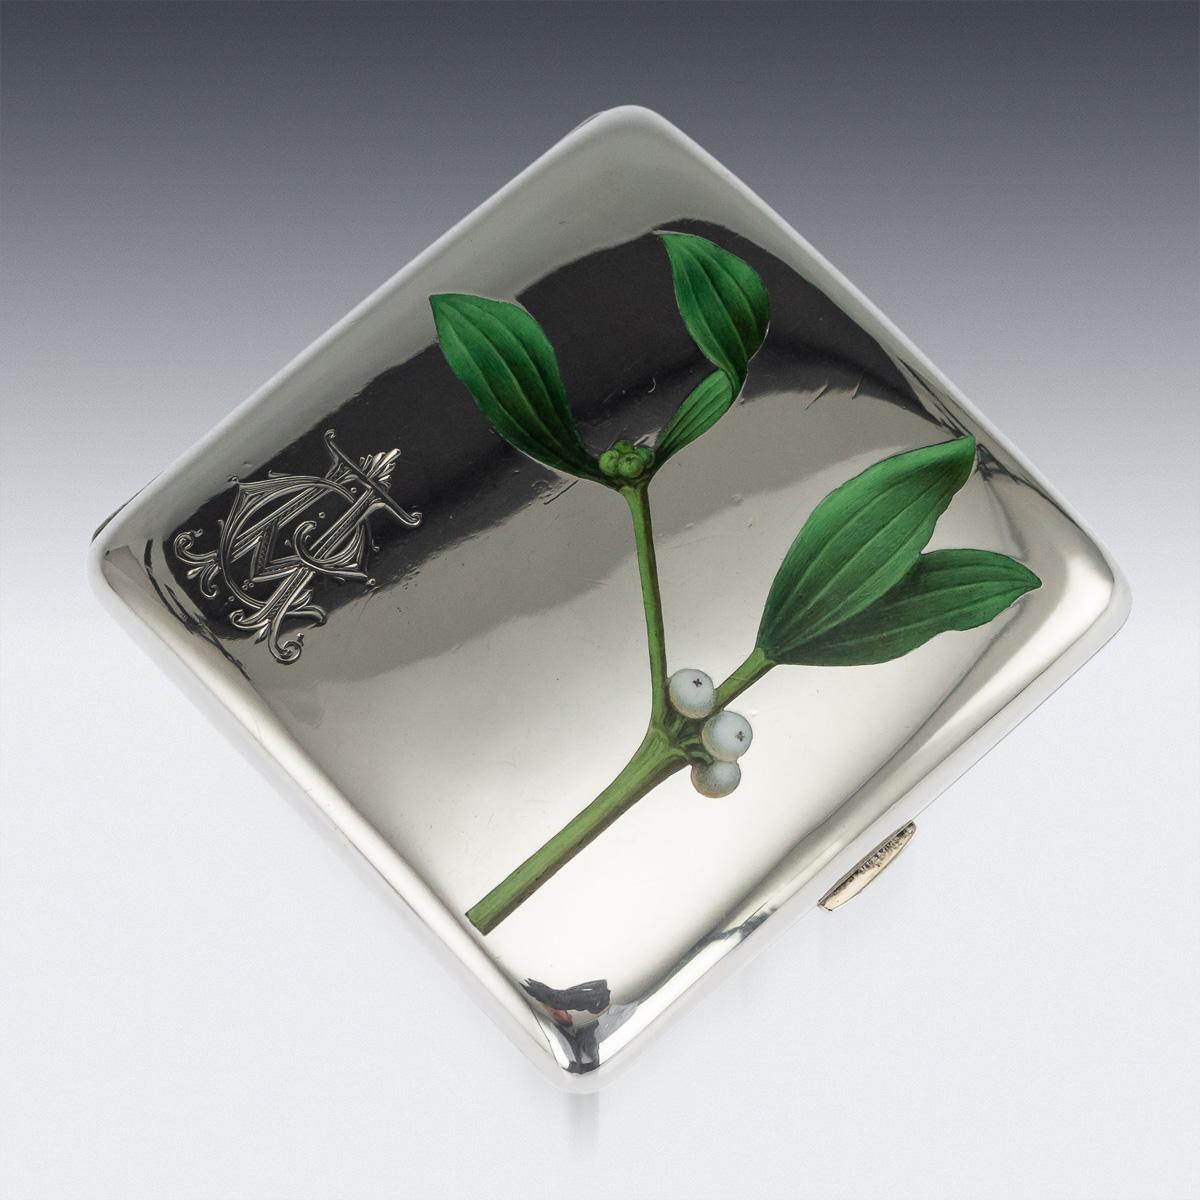 Antique early-20th century Austrian solid silver & enamel cigarette case with vesta, of rounded rectangular form, the surface of one side applied with a hand painted enamels depicting dogwood, engraved with initials, the reverse is plain, the inside